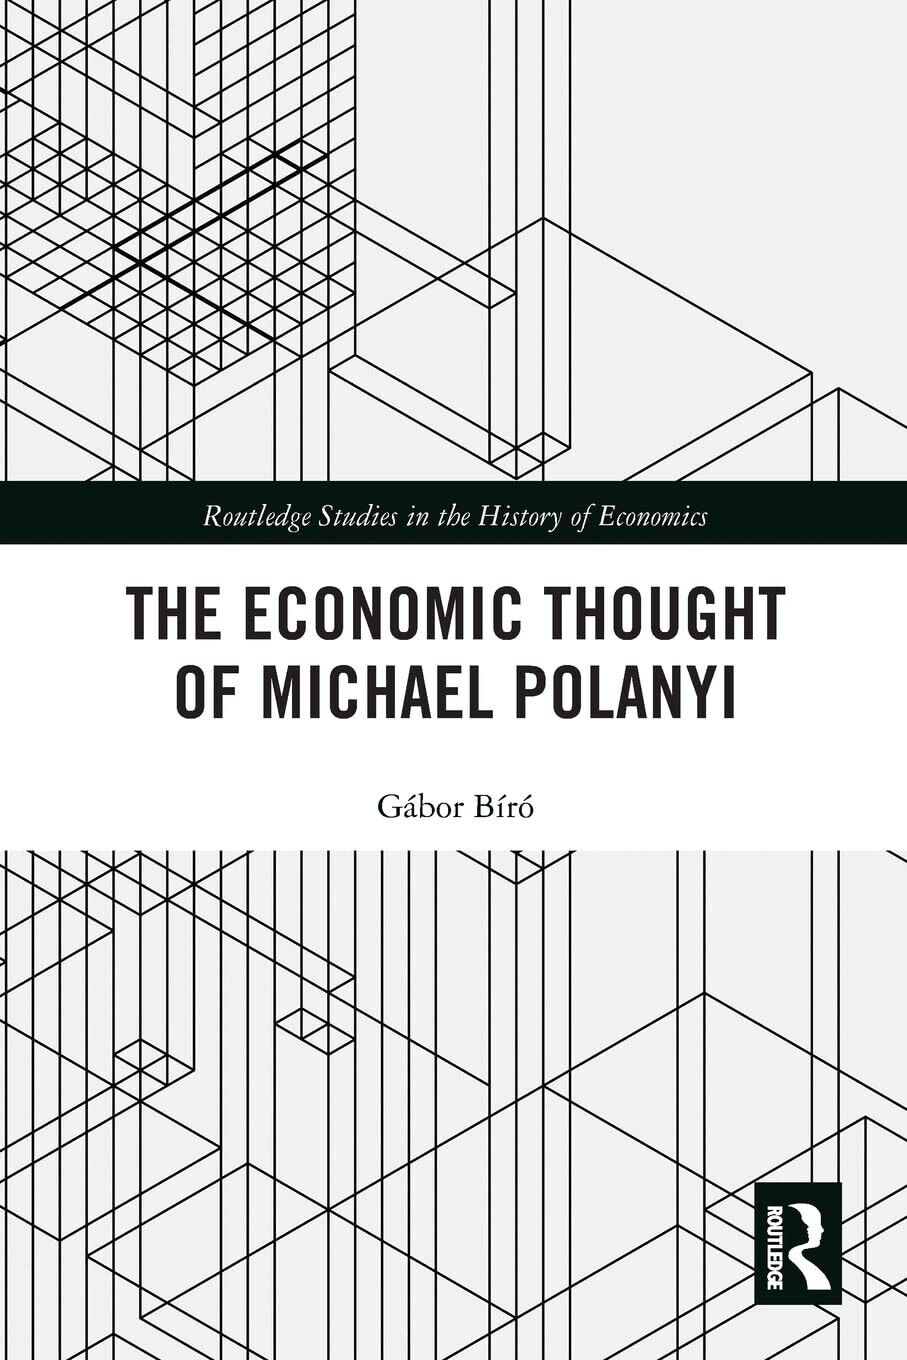 The Economic Thought Of Michael Polanyi - Gabor Biro - Routledge, 2021